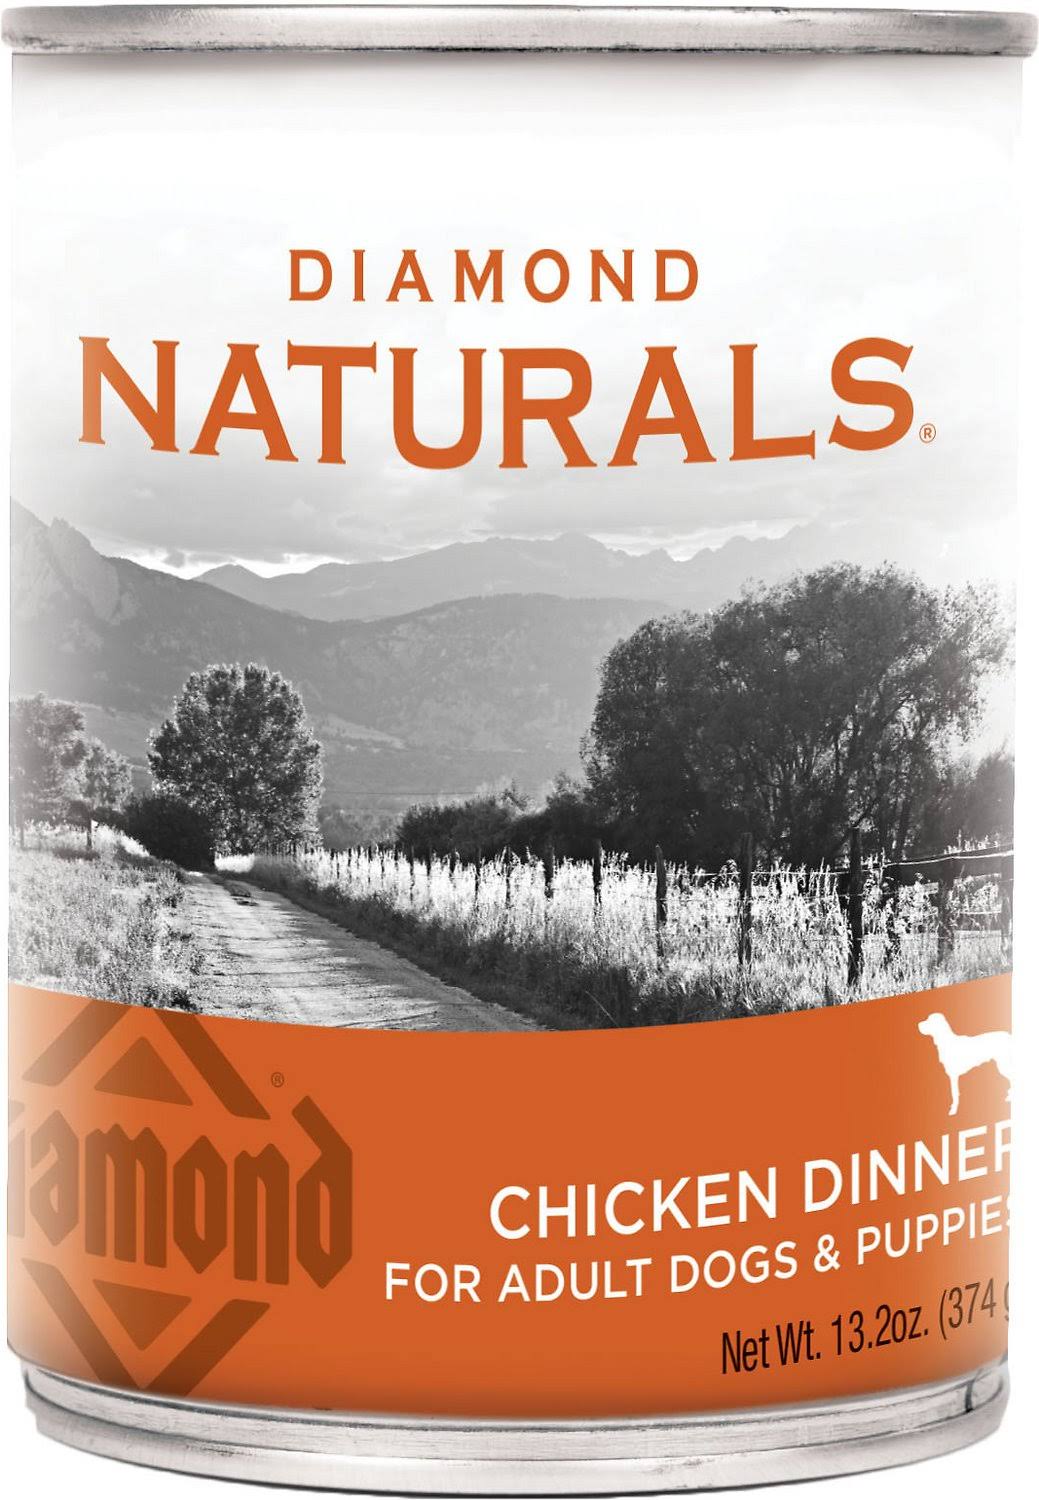 Diamond Naturals Adult Dogs and Puppies Canned Food - Chicken Dinner, 13oz